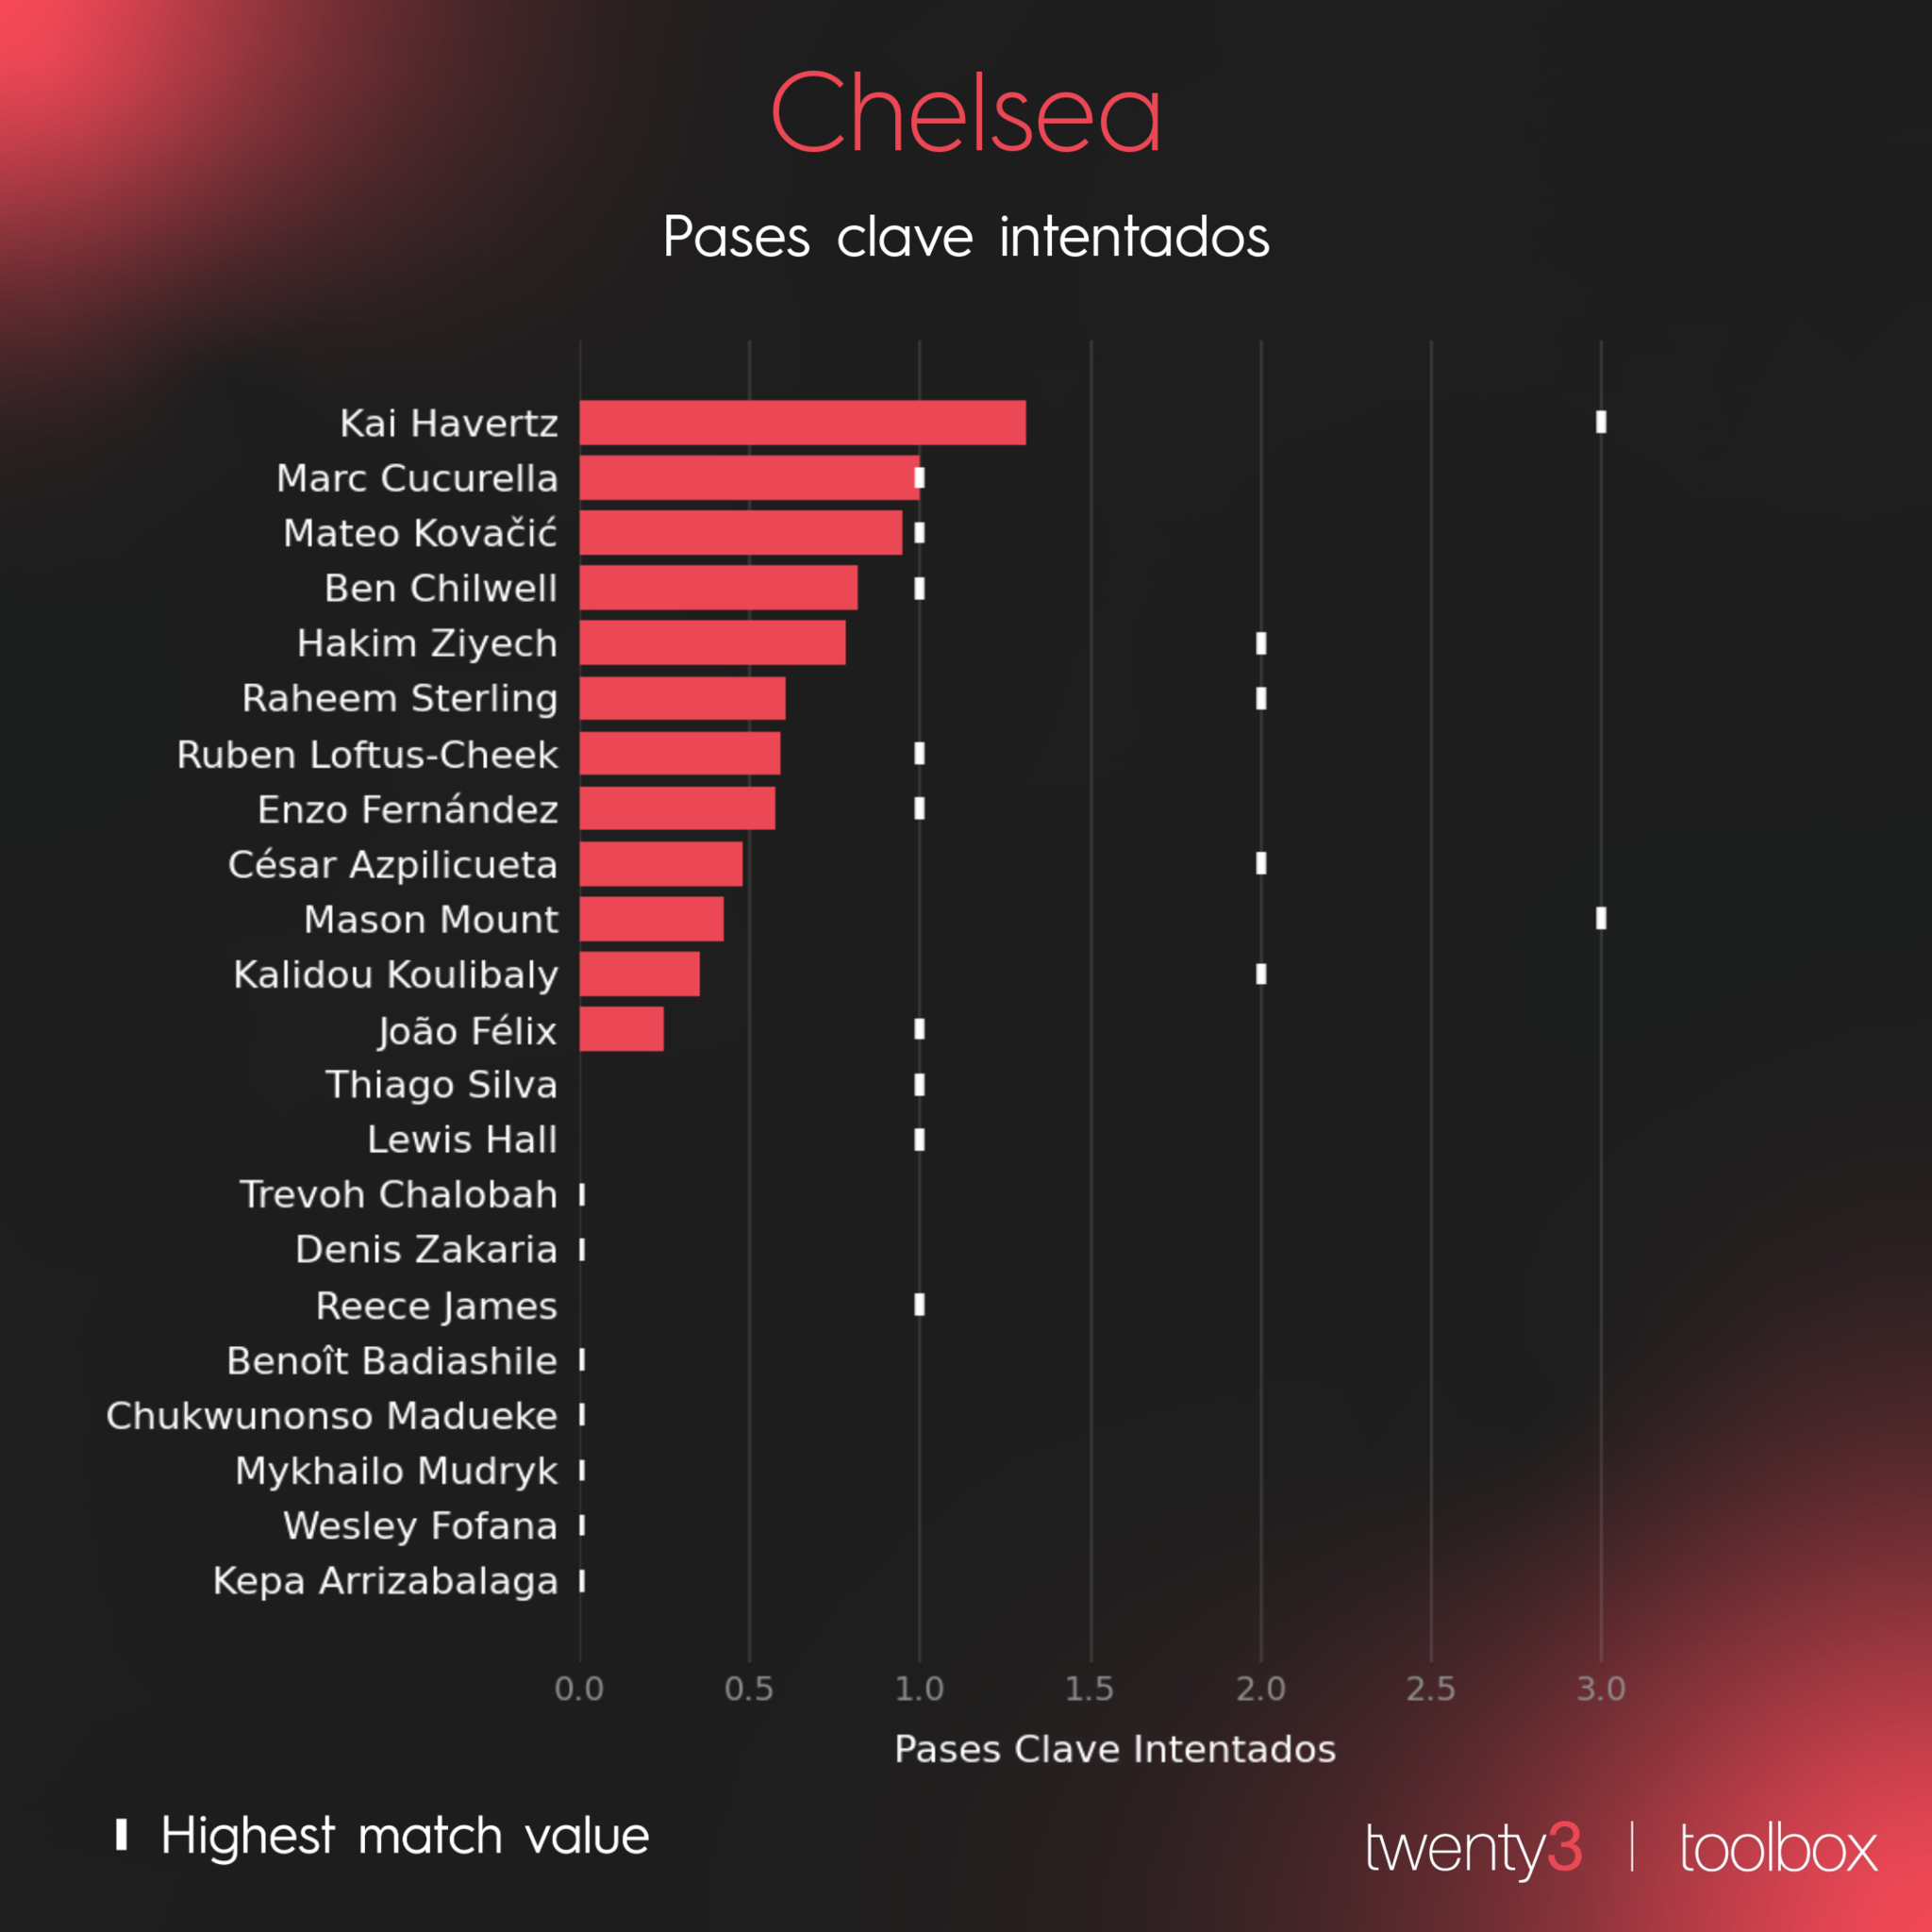 Key passes attempted by Chelsea